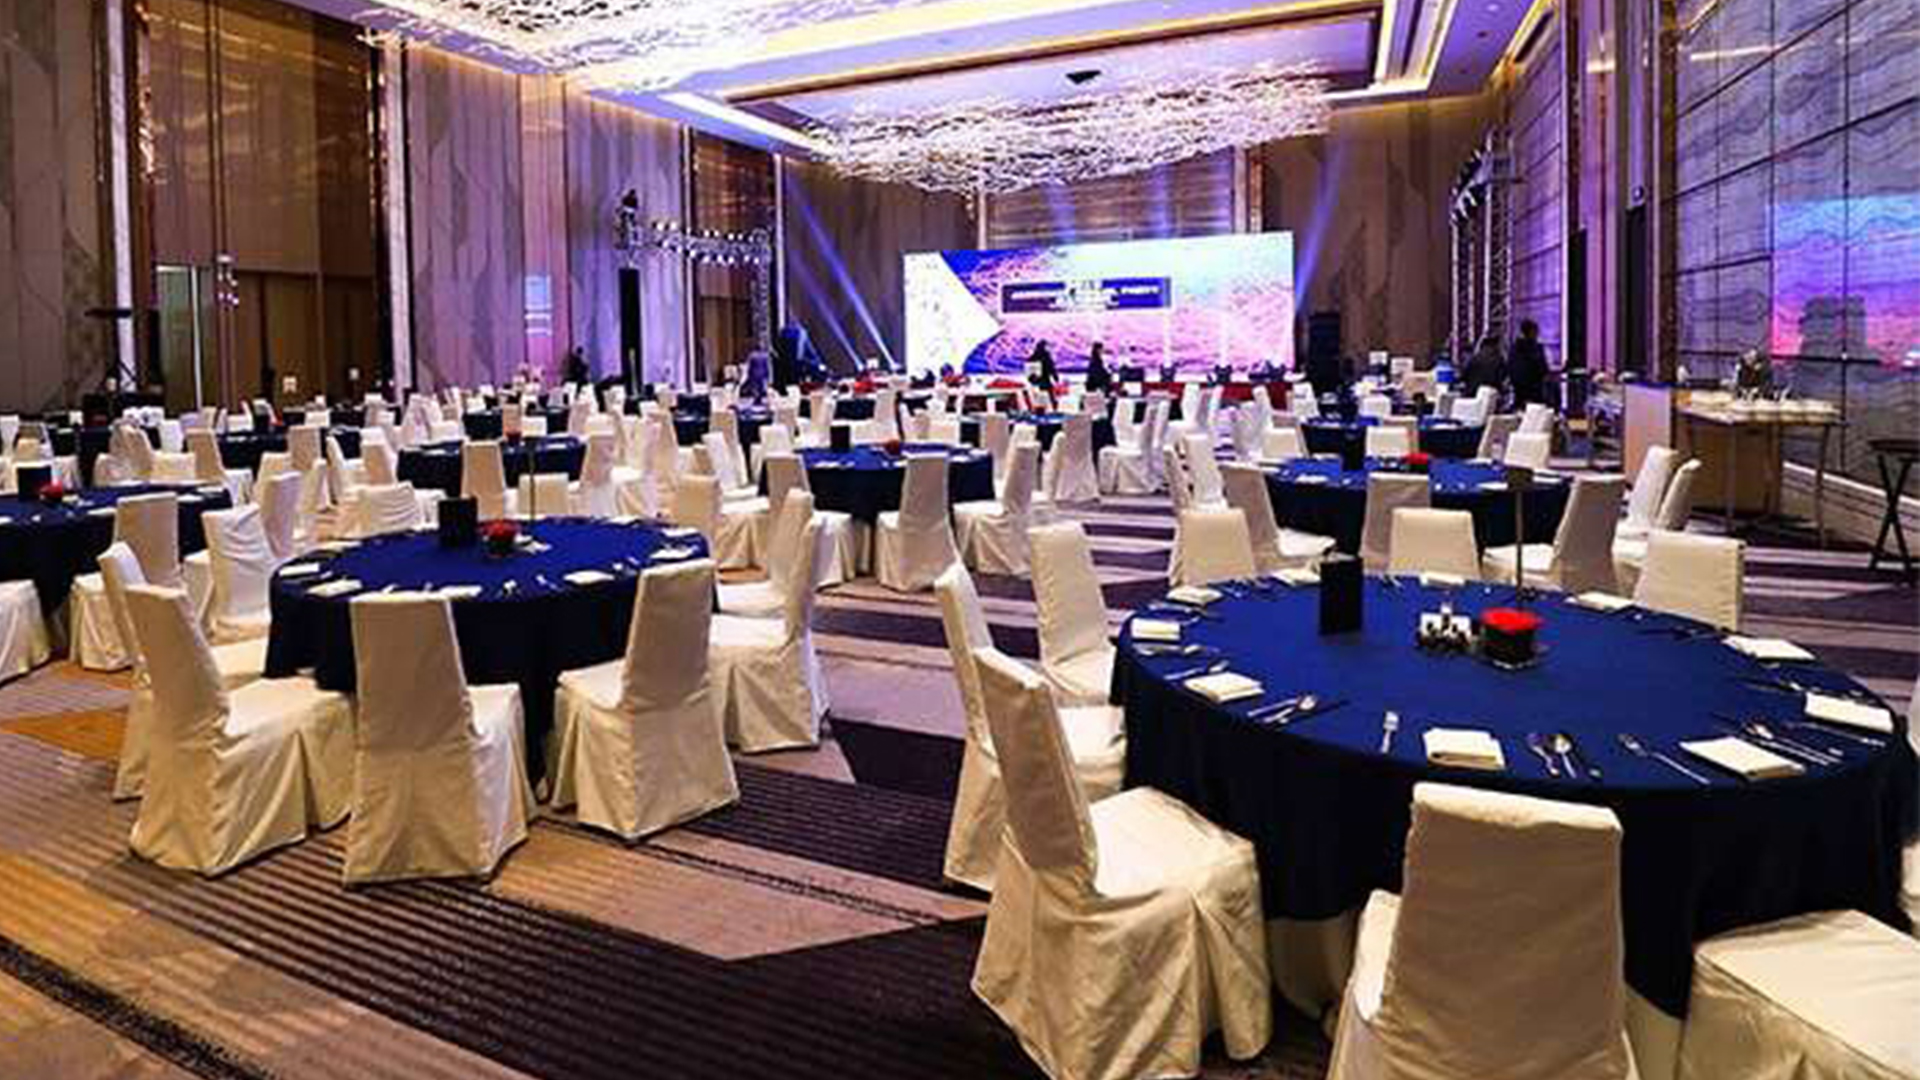 Annual Event and Annual Dinner for Sheraton Guangzhou by D2 Studio Event Planner Event Agency Event Planner Hong Kong and Guangzhou China who does Annual Event and Annual Dinner 4